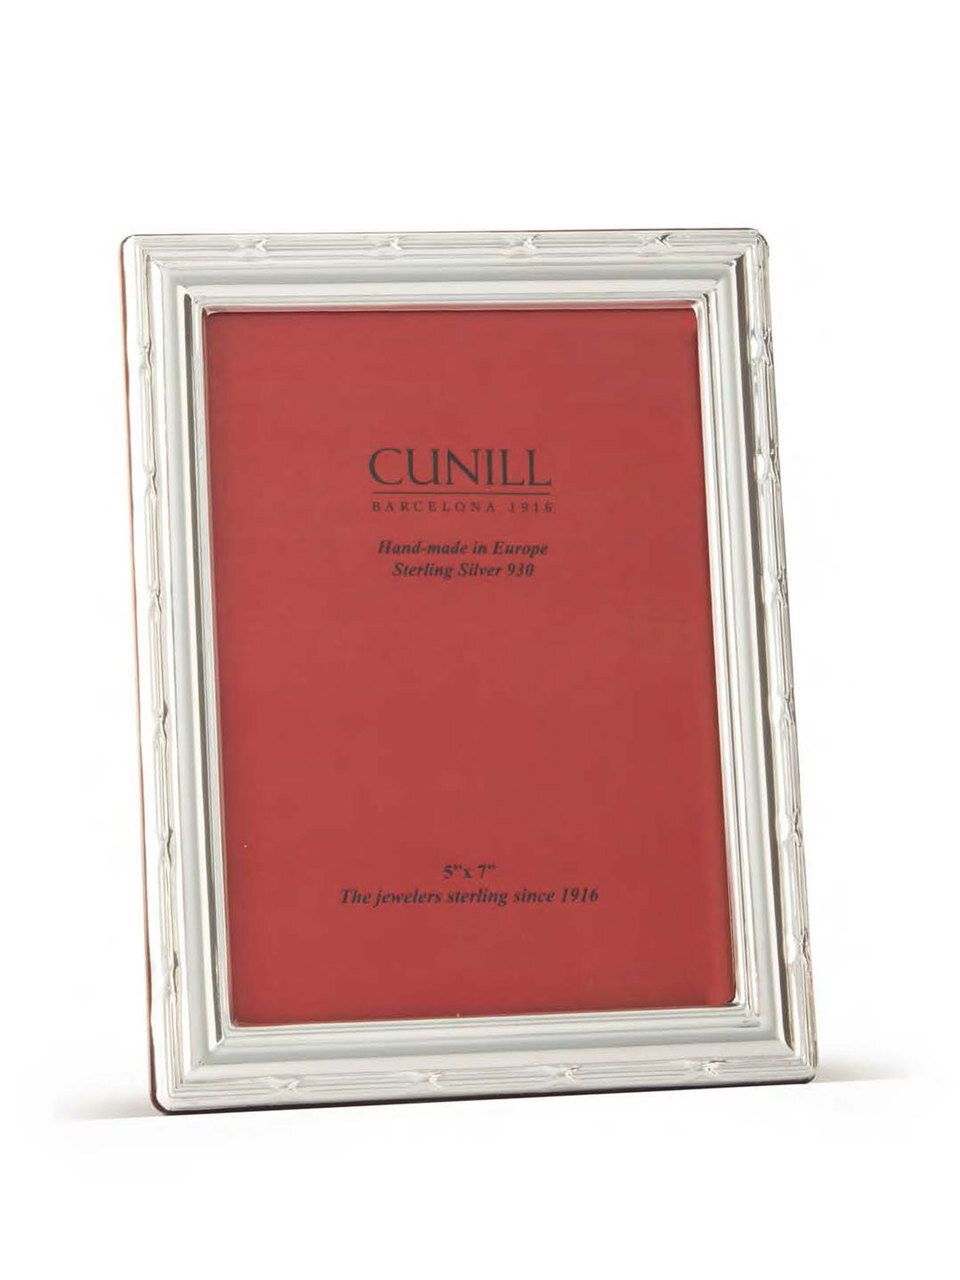 Cunill Ribbon 4 x 6 Inch Picture Frame - Sterling Silver